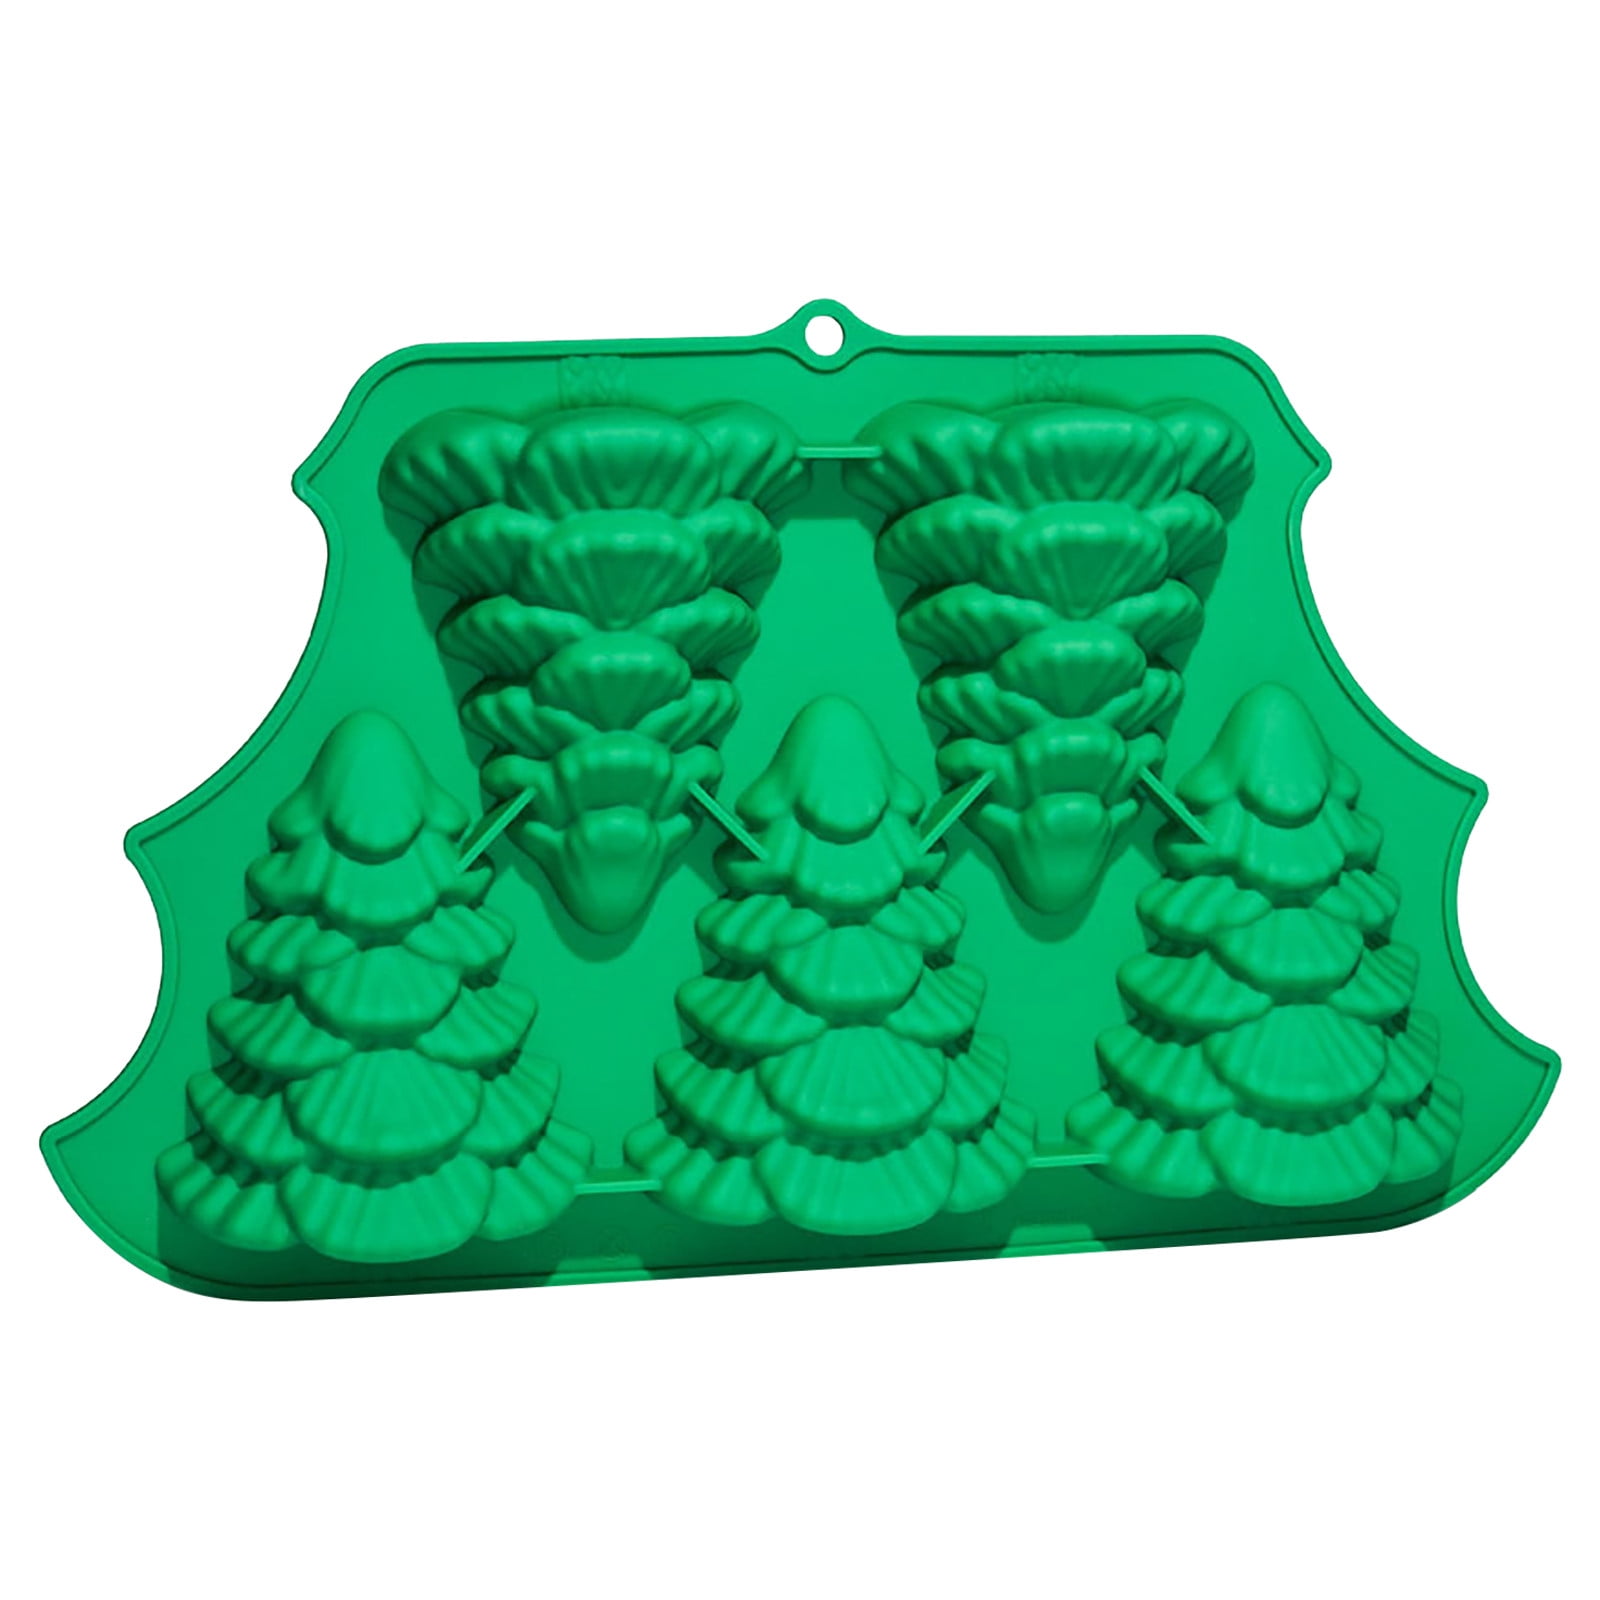 IMIKEYA Christmas Tree Cake Pan Silicone Cake Mold 3d Christmas Baking Mold  Pie Mould Bakeware Tray Ice Cube Diy Baking Mold Candy Molds for Xmas